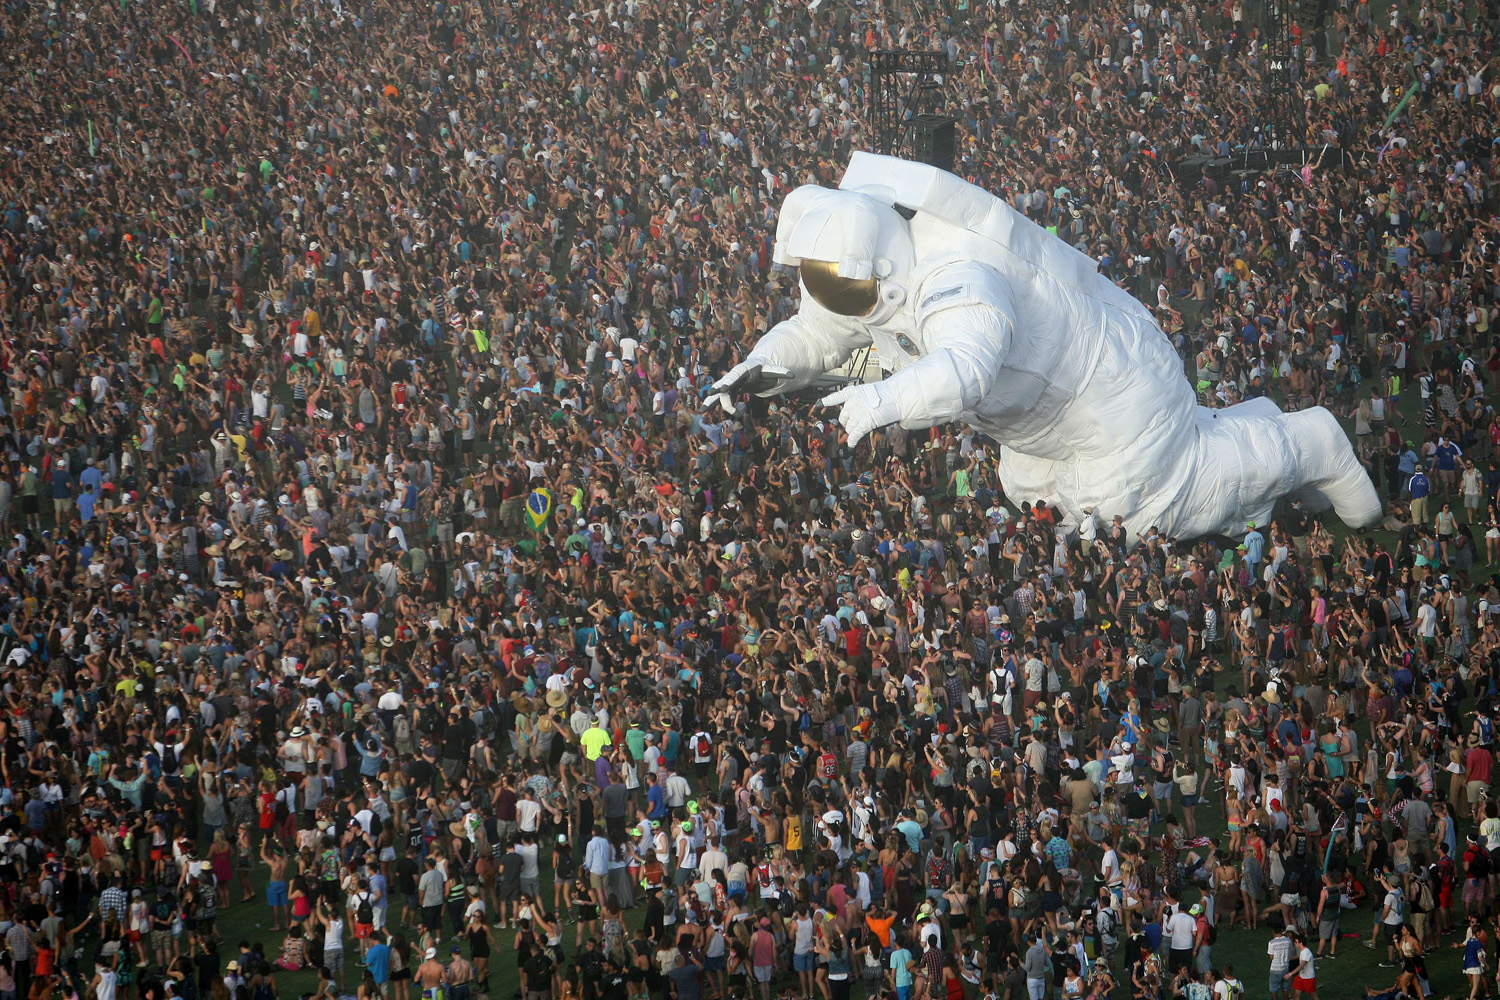 The giant moving inflated astronaut art piece, Escape Velocity, is surrounded by music fans at the Coachella Valley Music &amp; Arts Festival at the Empire Polo Club in Indio, California, April 12, 2014.